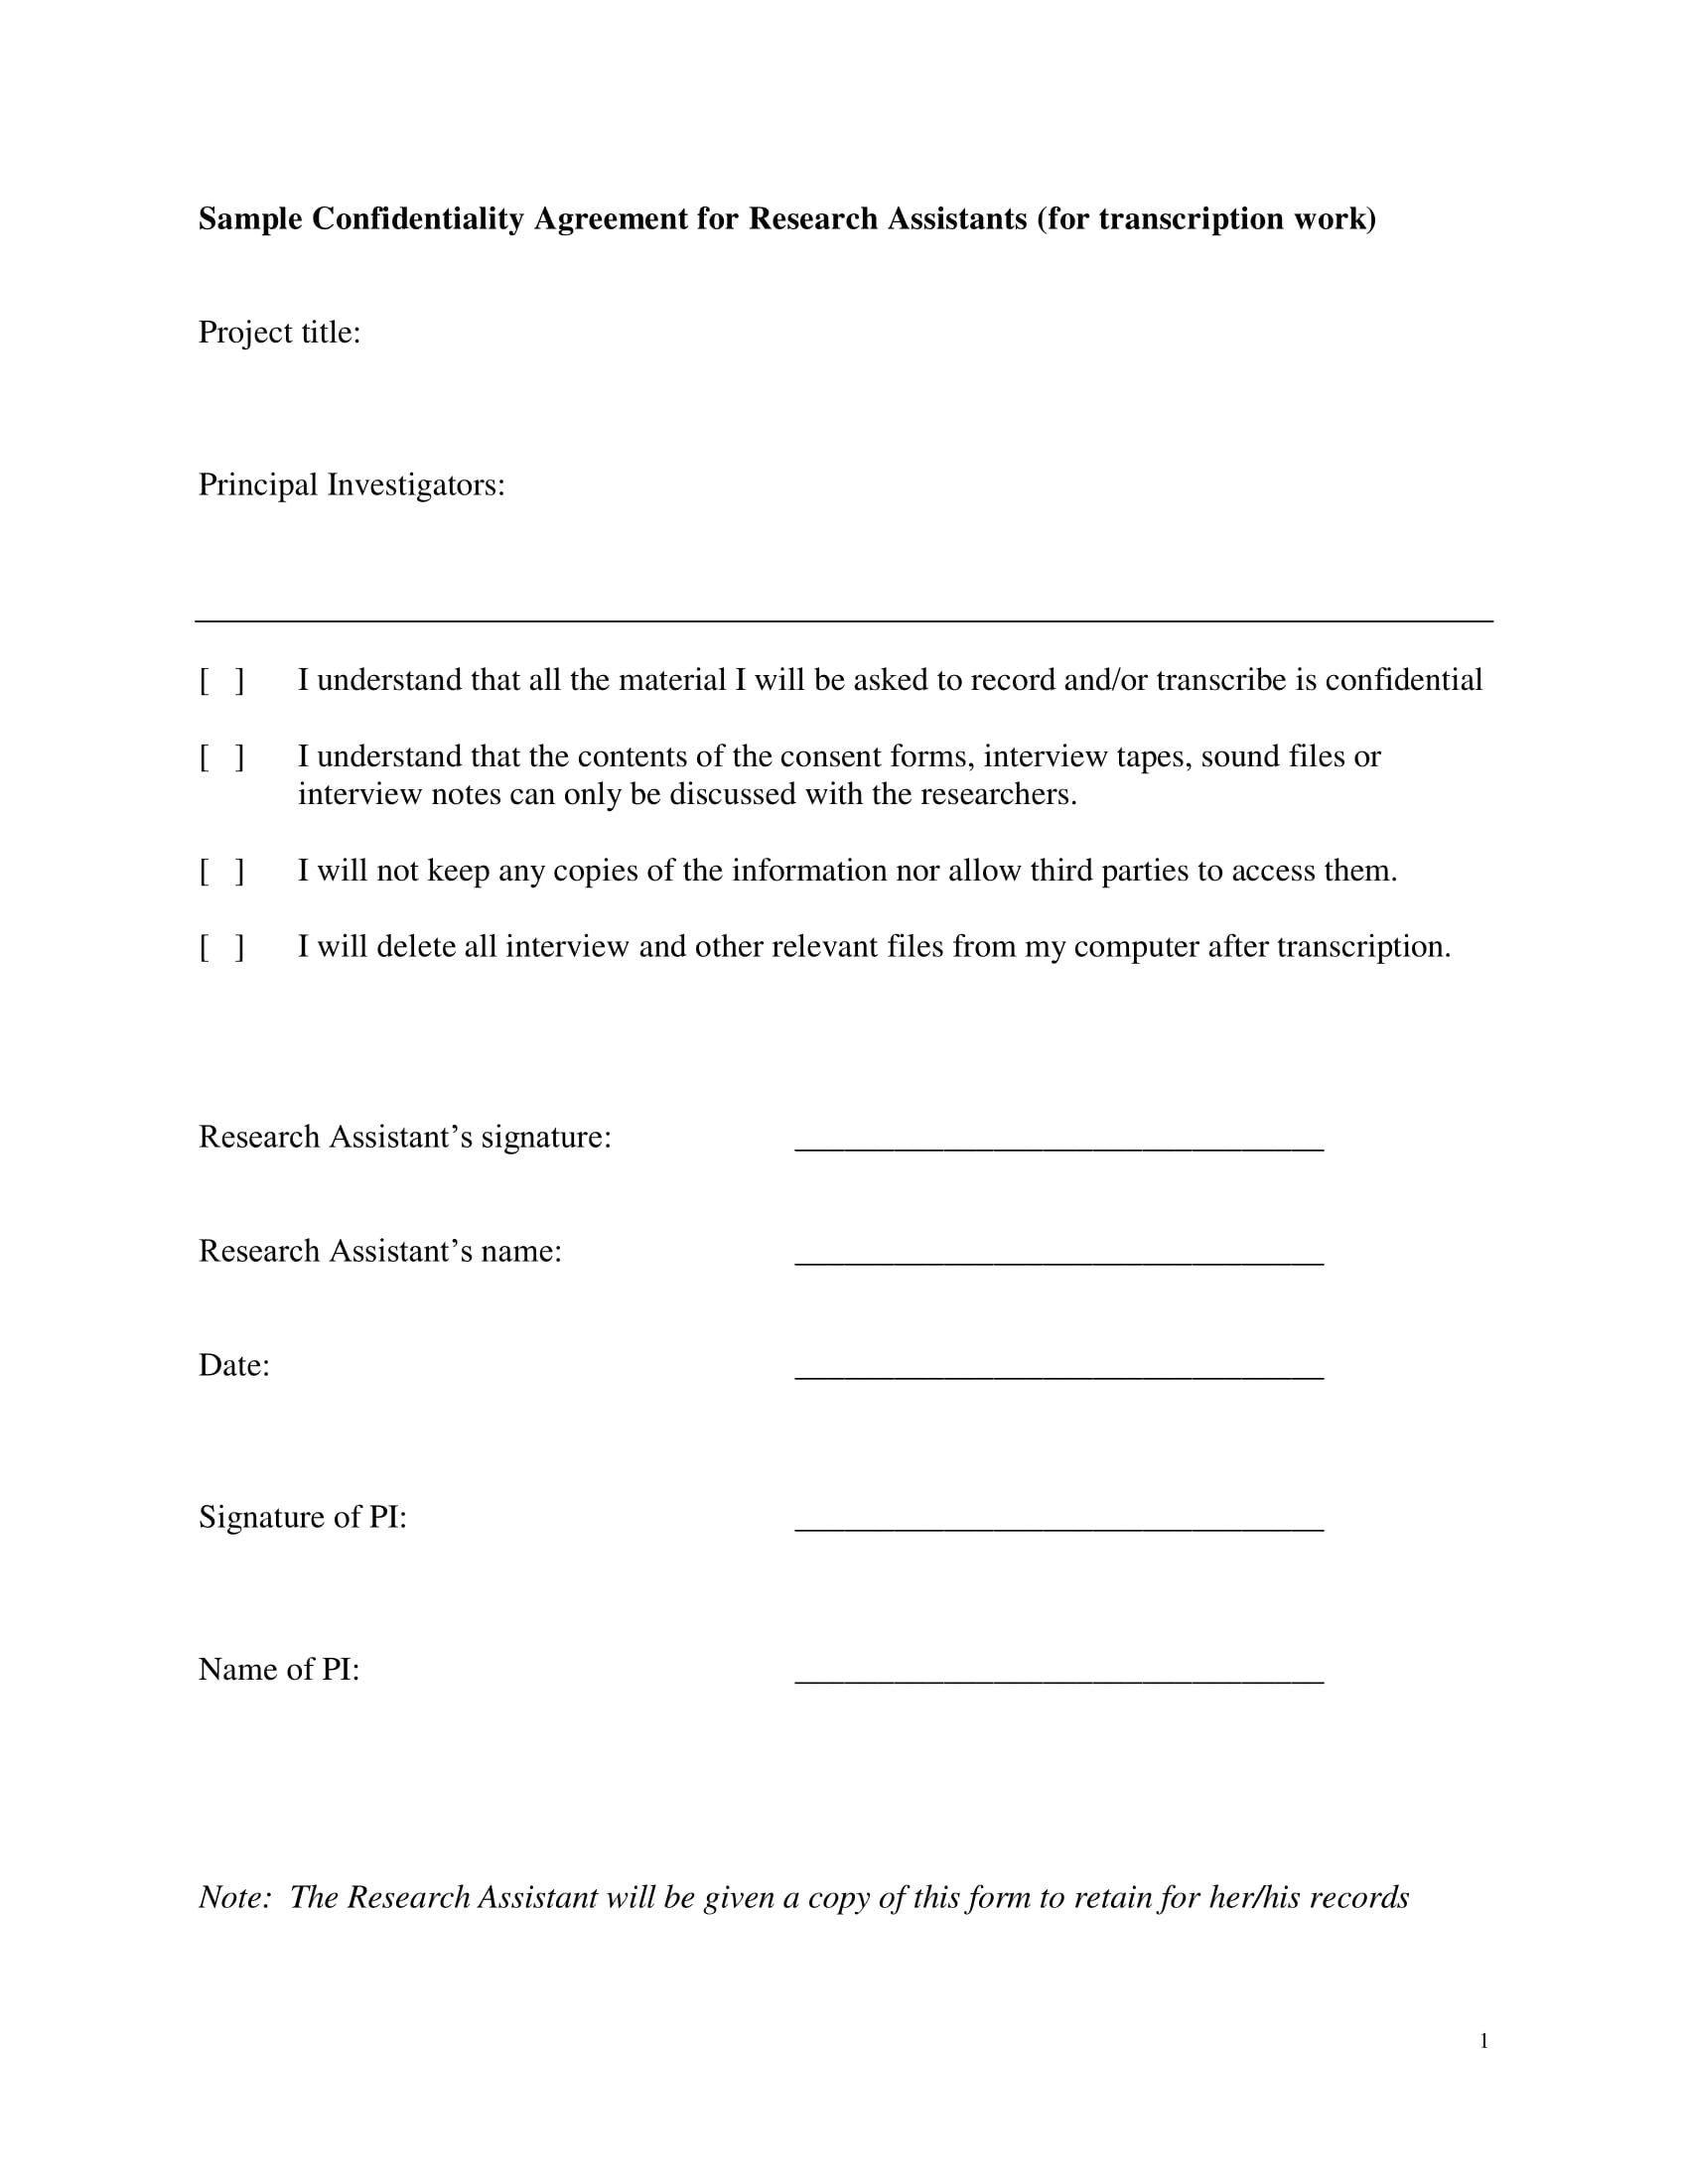 FREE 23+ Confidentiality Agreement Contract Forms in PDF  MS Word For non disclosure agreement template for research